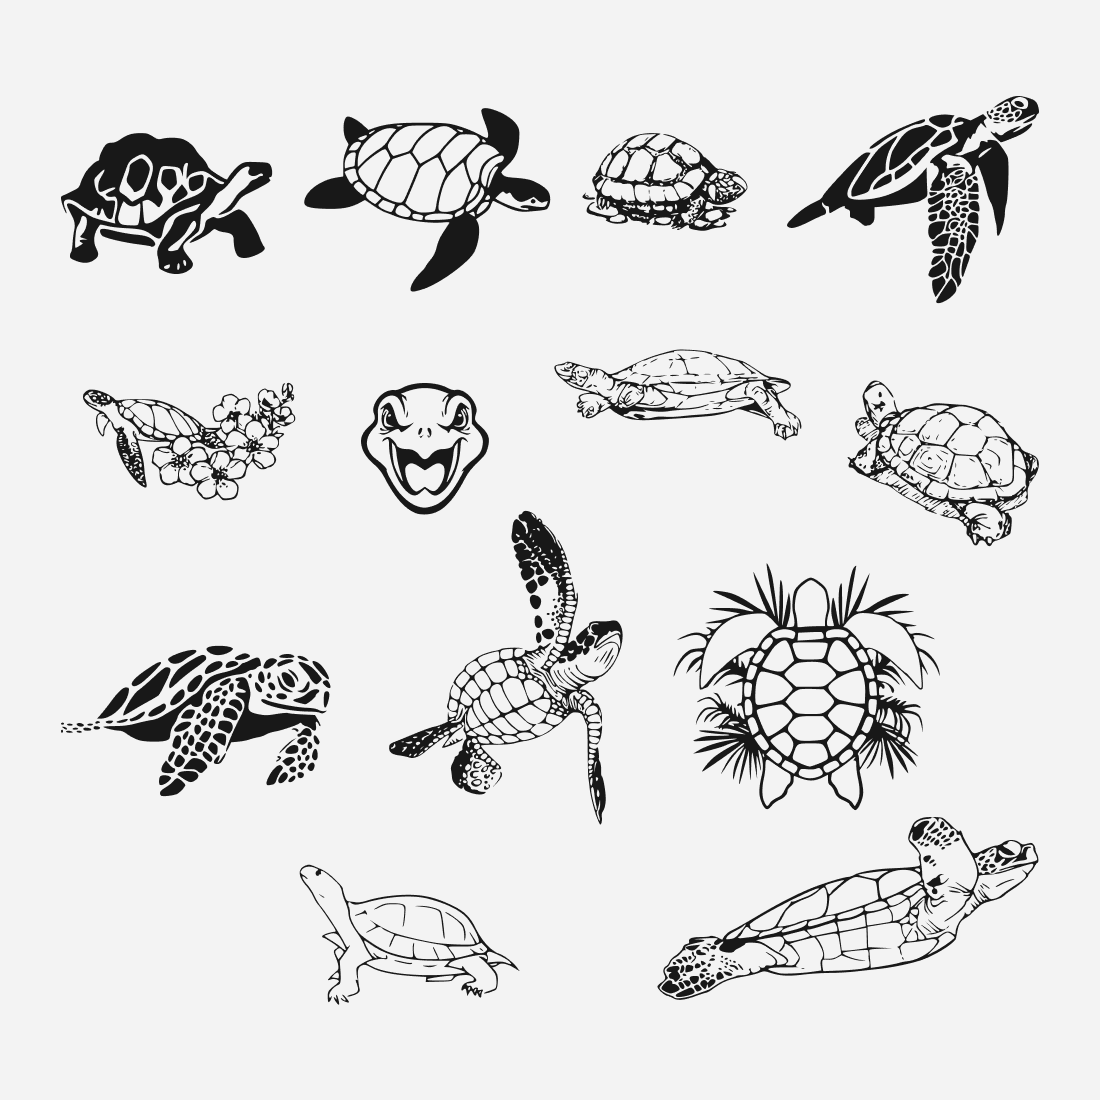 Bunch of different types of turtles.